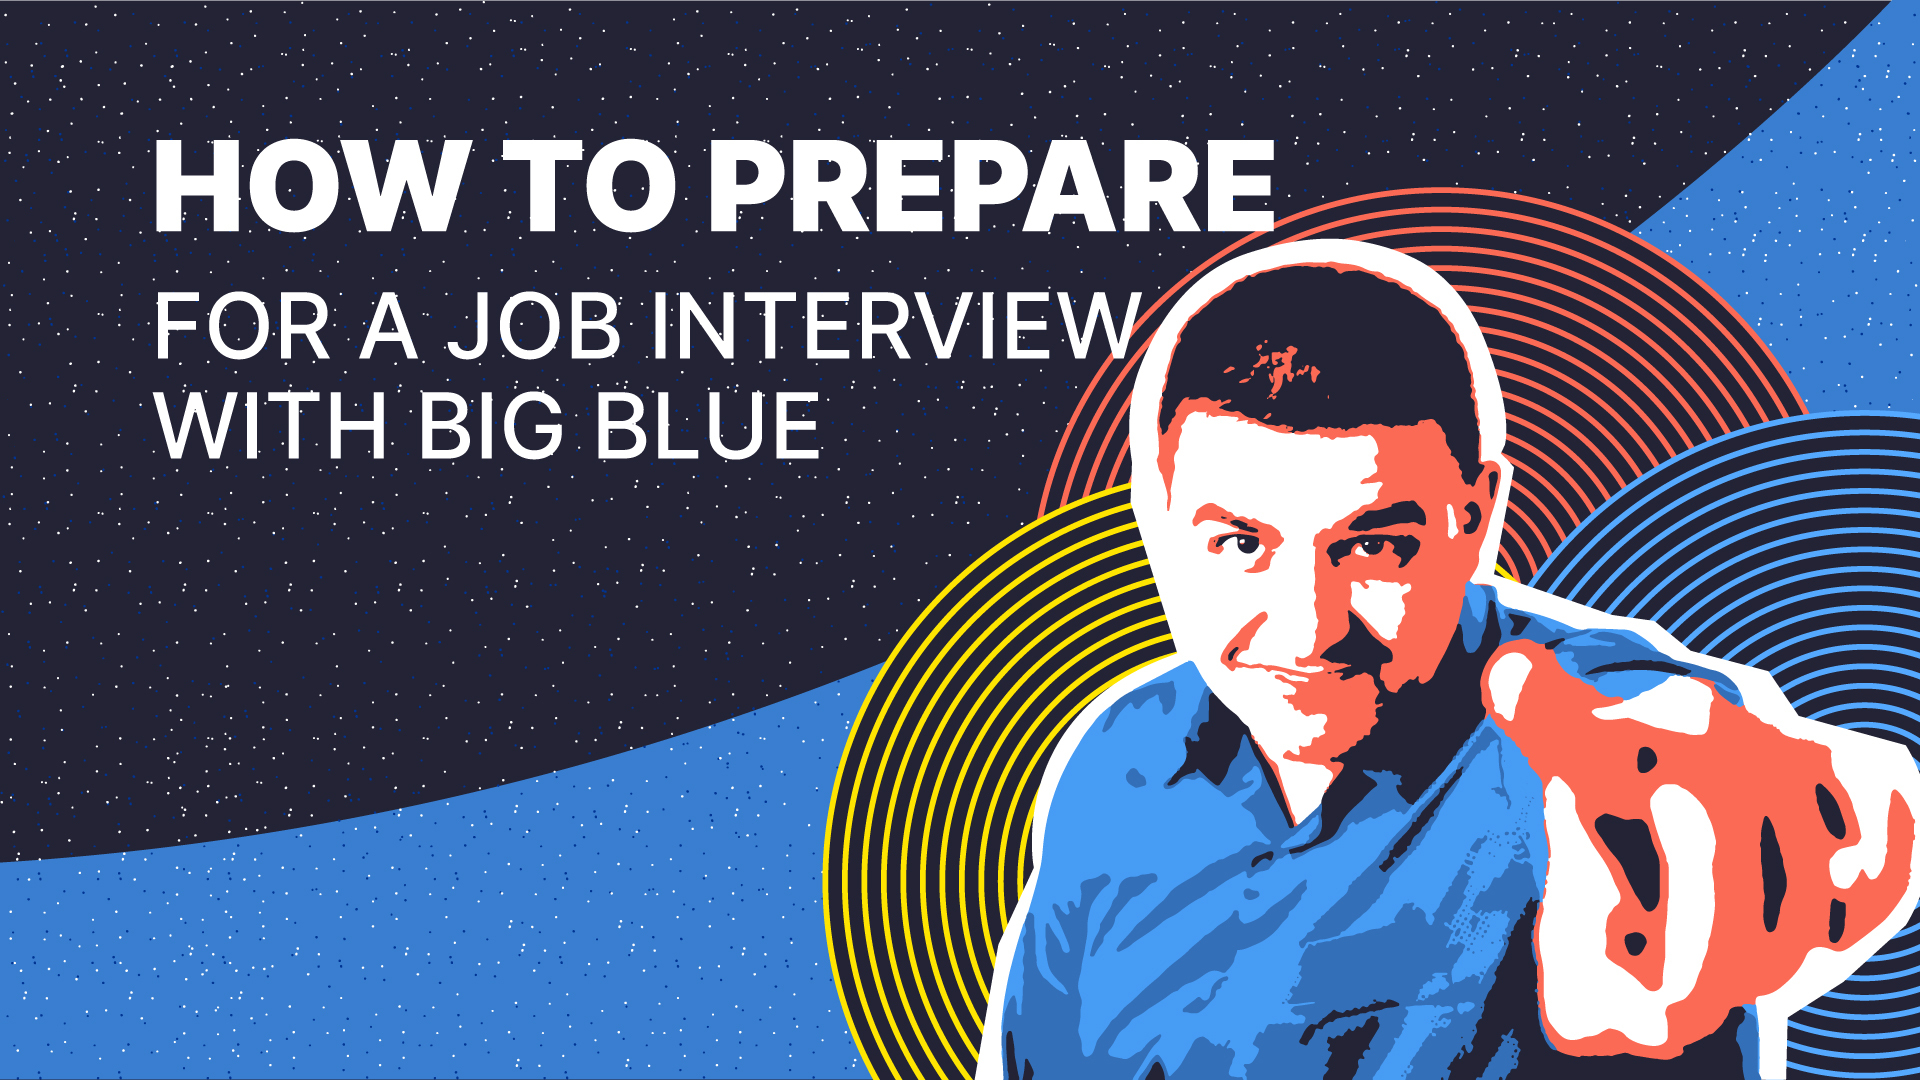 How to prepare for a job interview with Big Blue